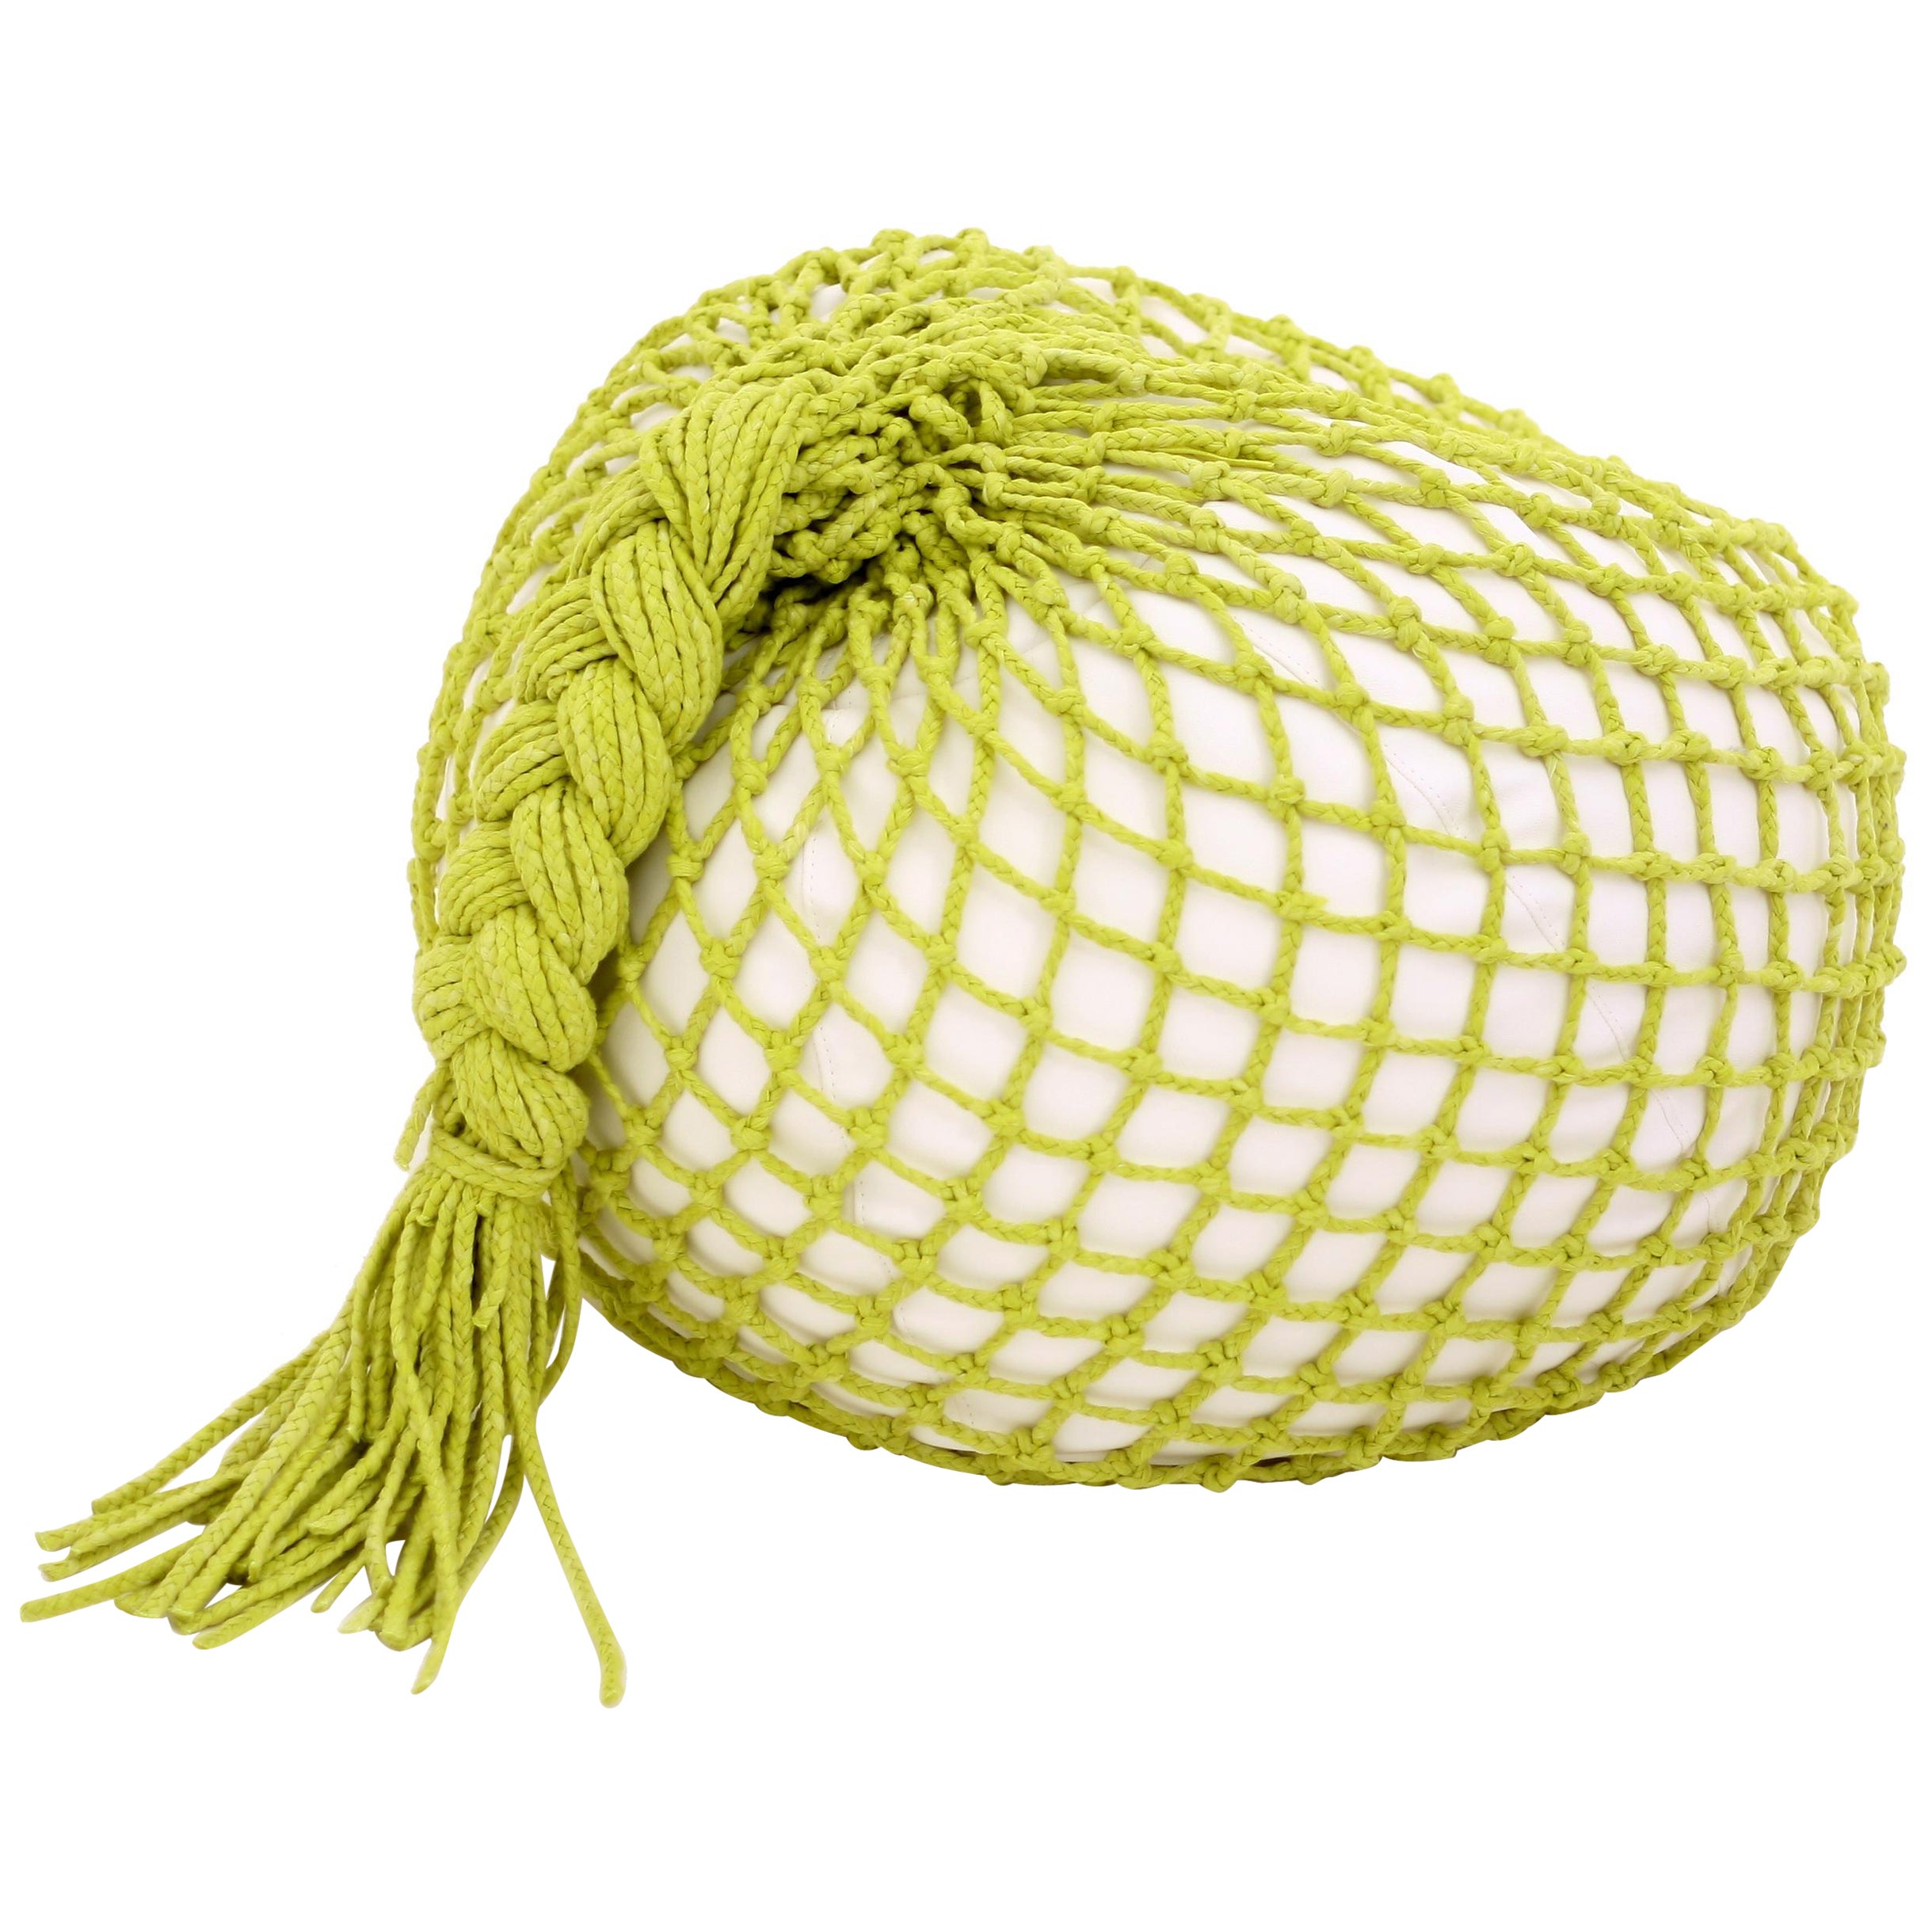 Hand-knotted Pouf - TRAP Lime Big For Sale